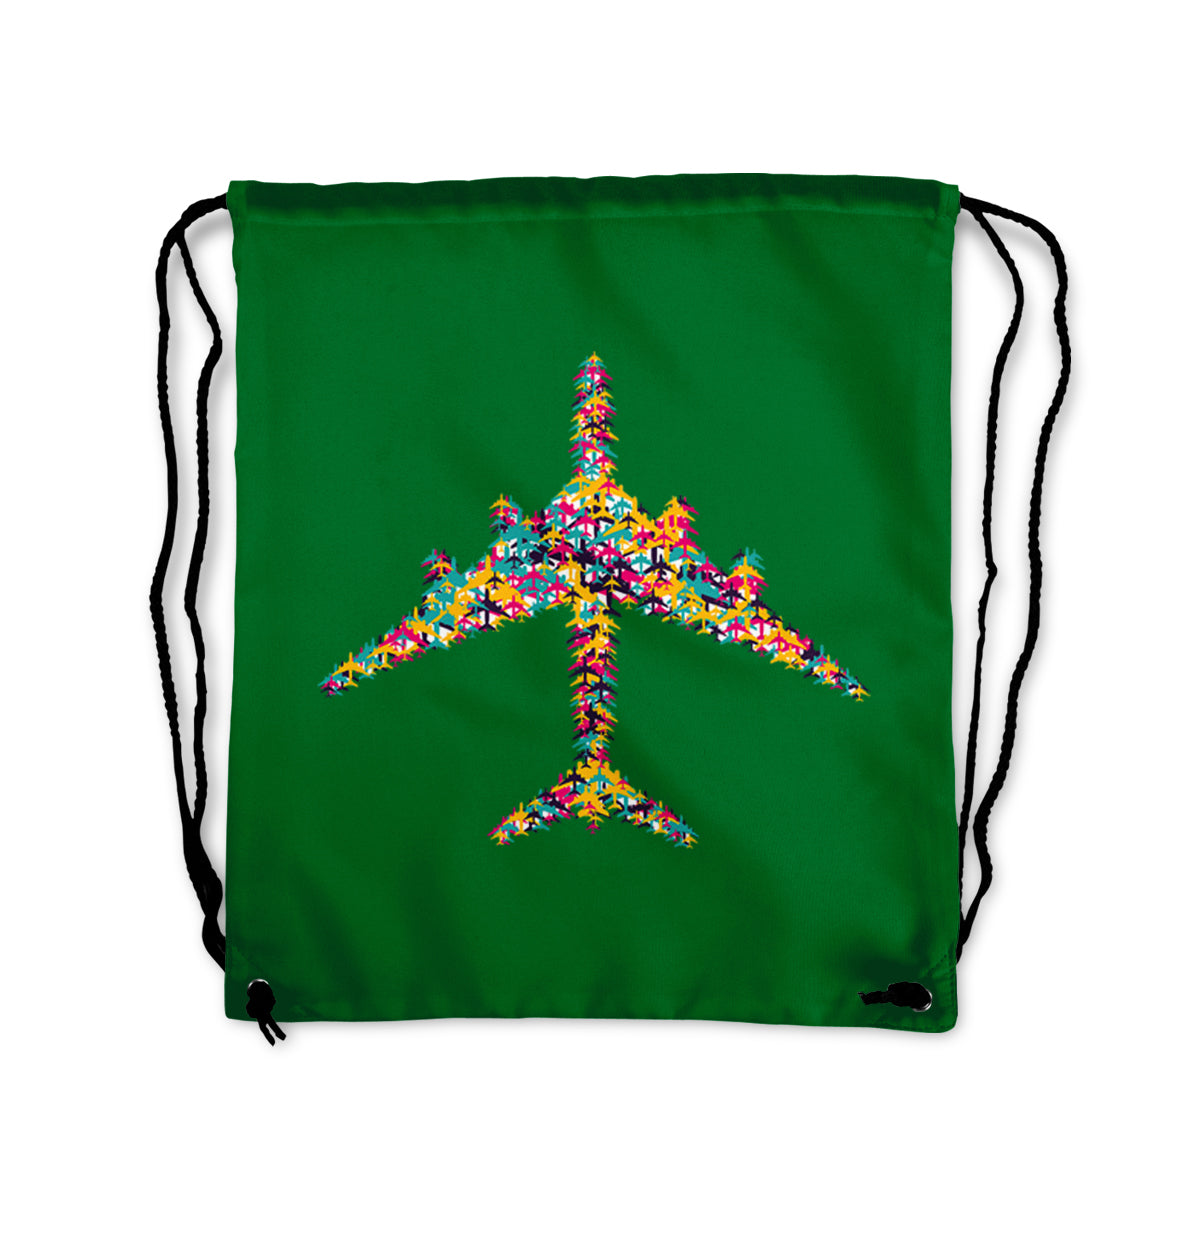 Colourful Airplane Designed Drawstring Bags